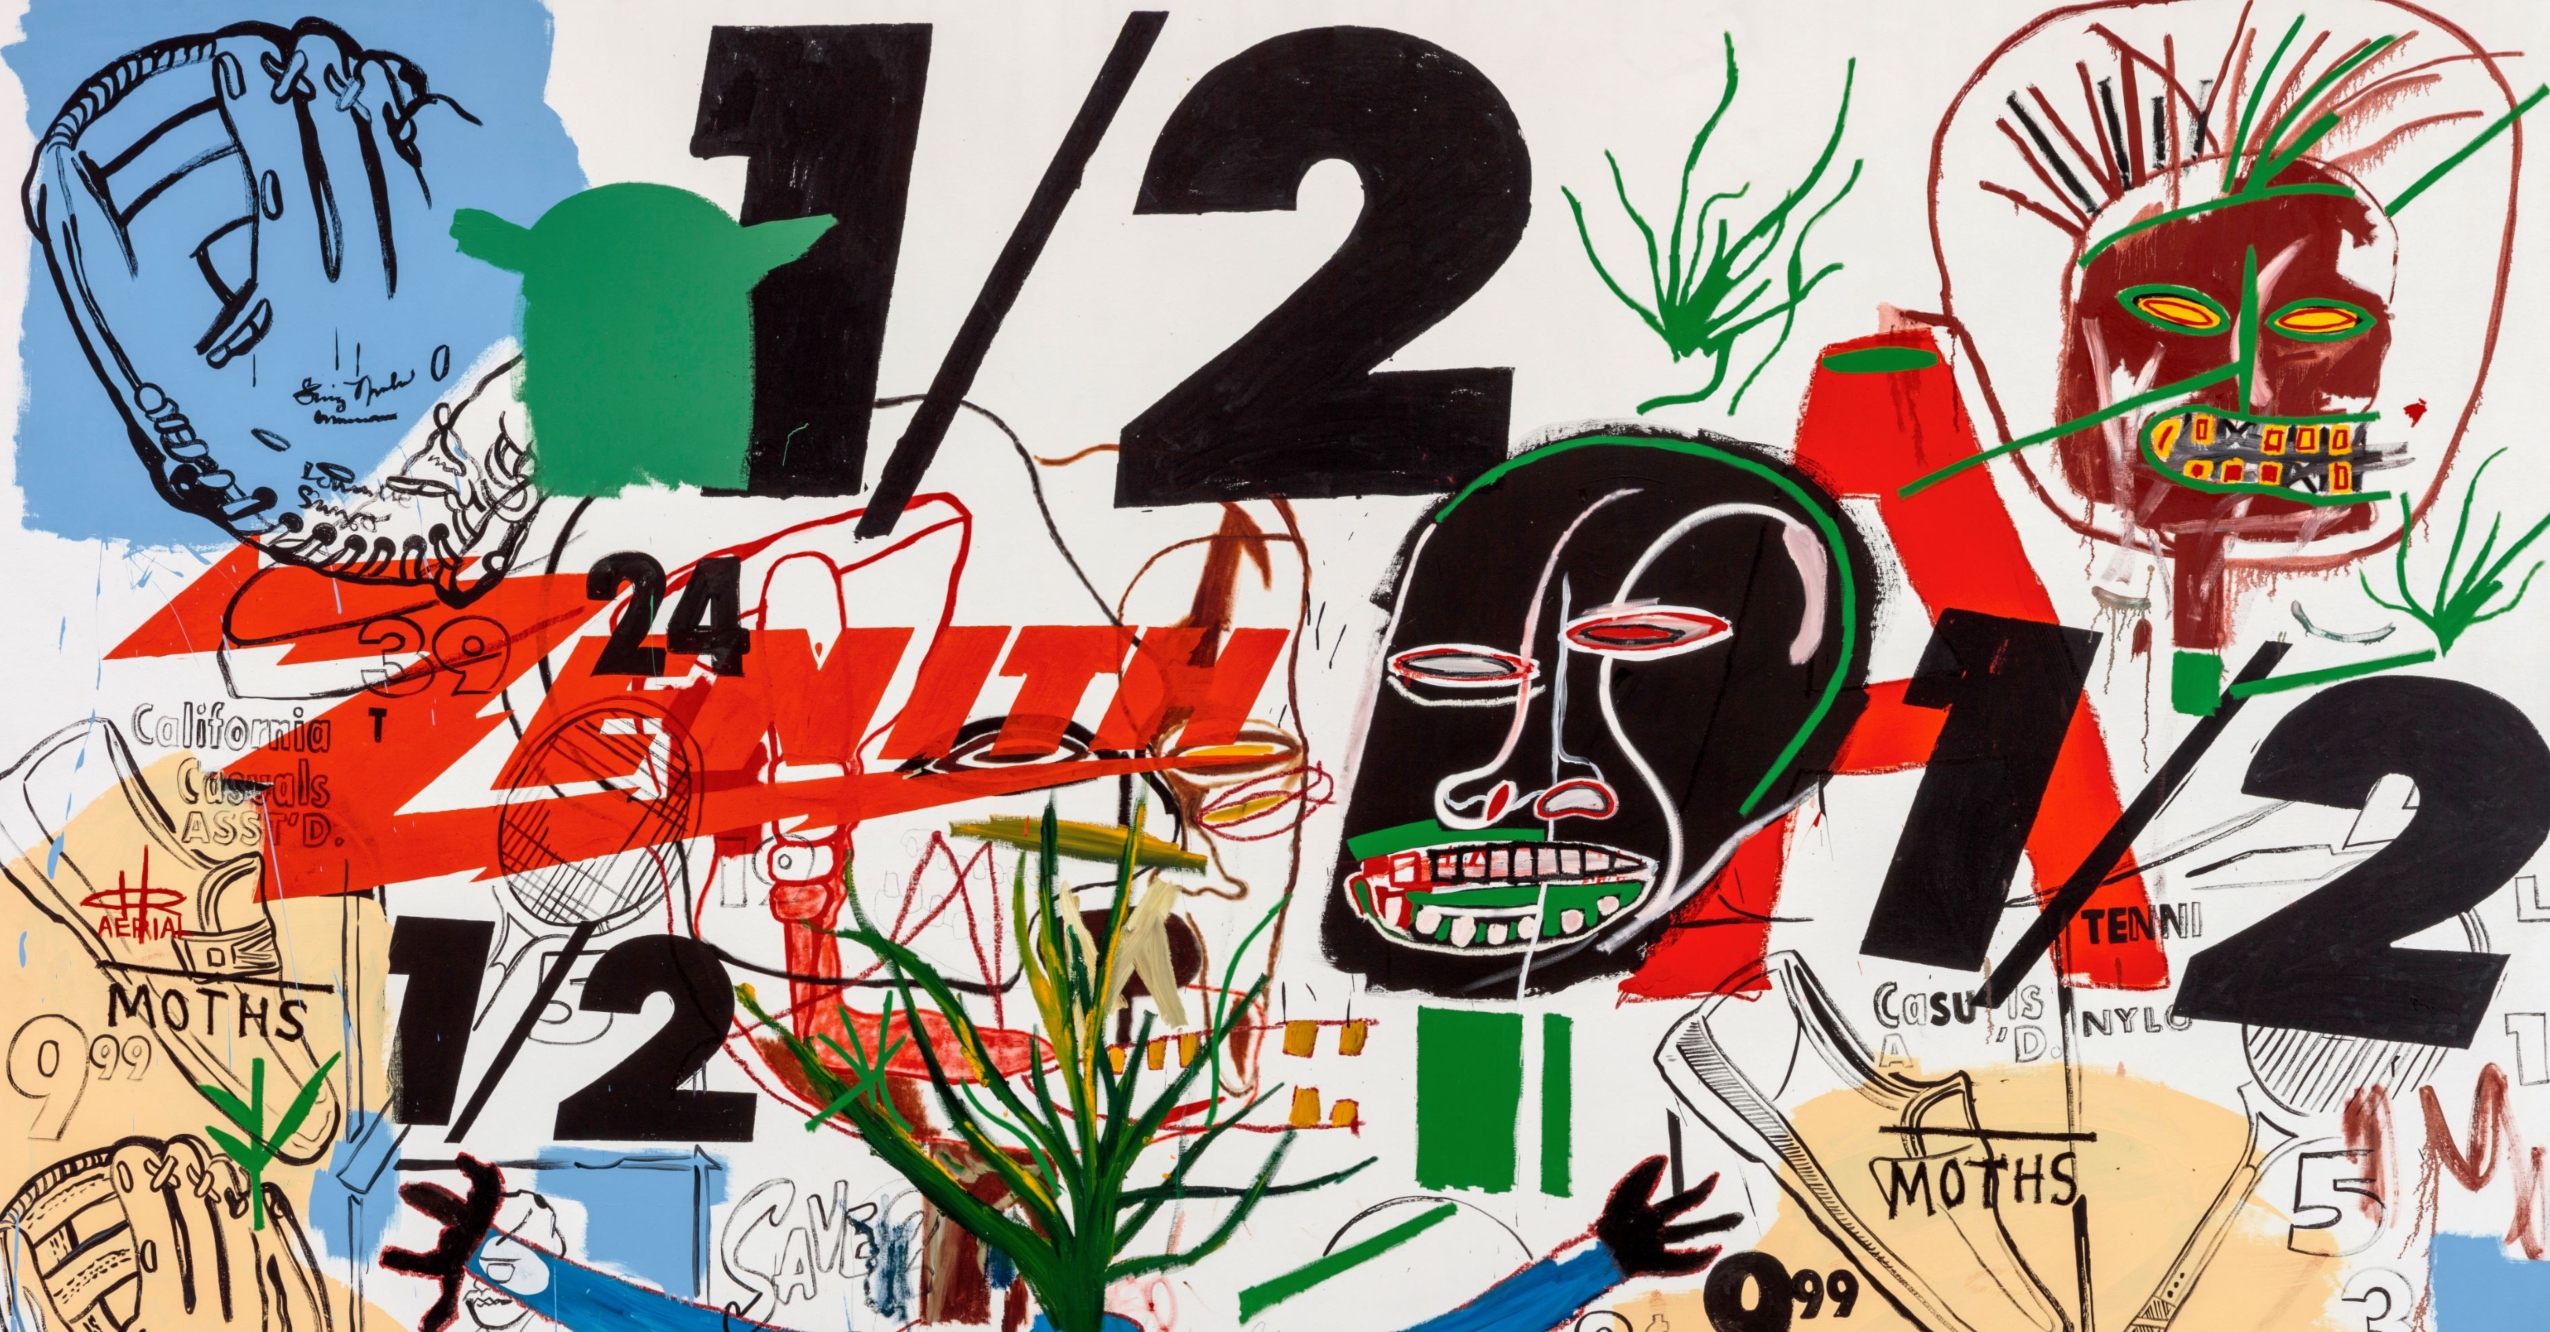 This Andy Warhol x Jean-Michel Basquiat Collaborative Painting Will Fetch Millions At Auction